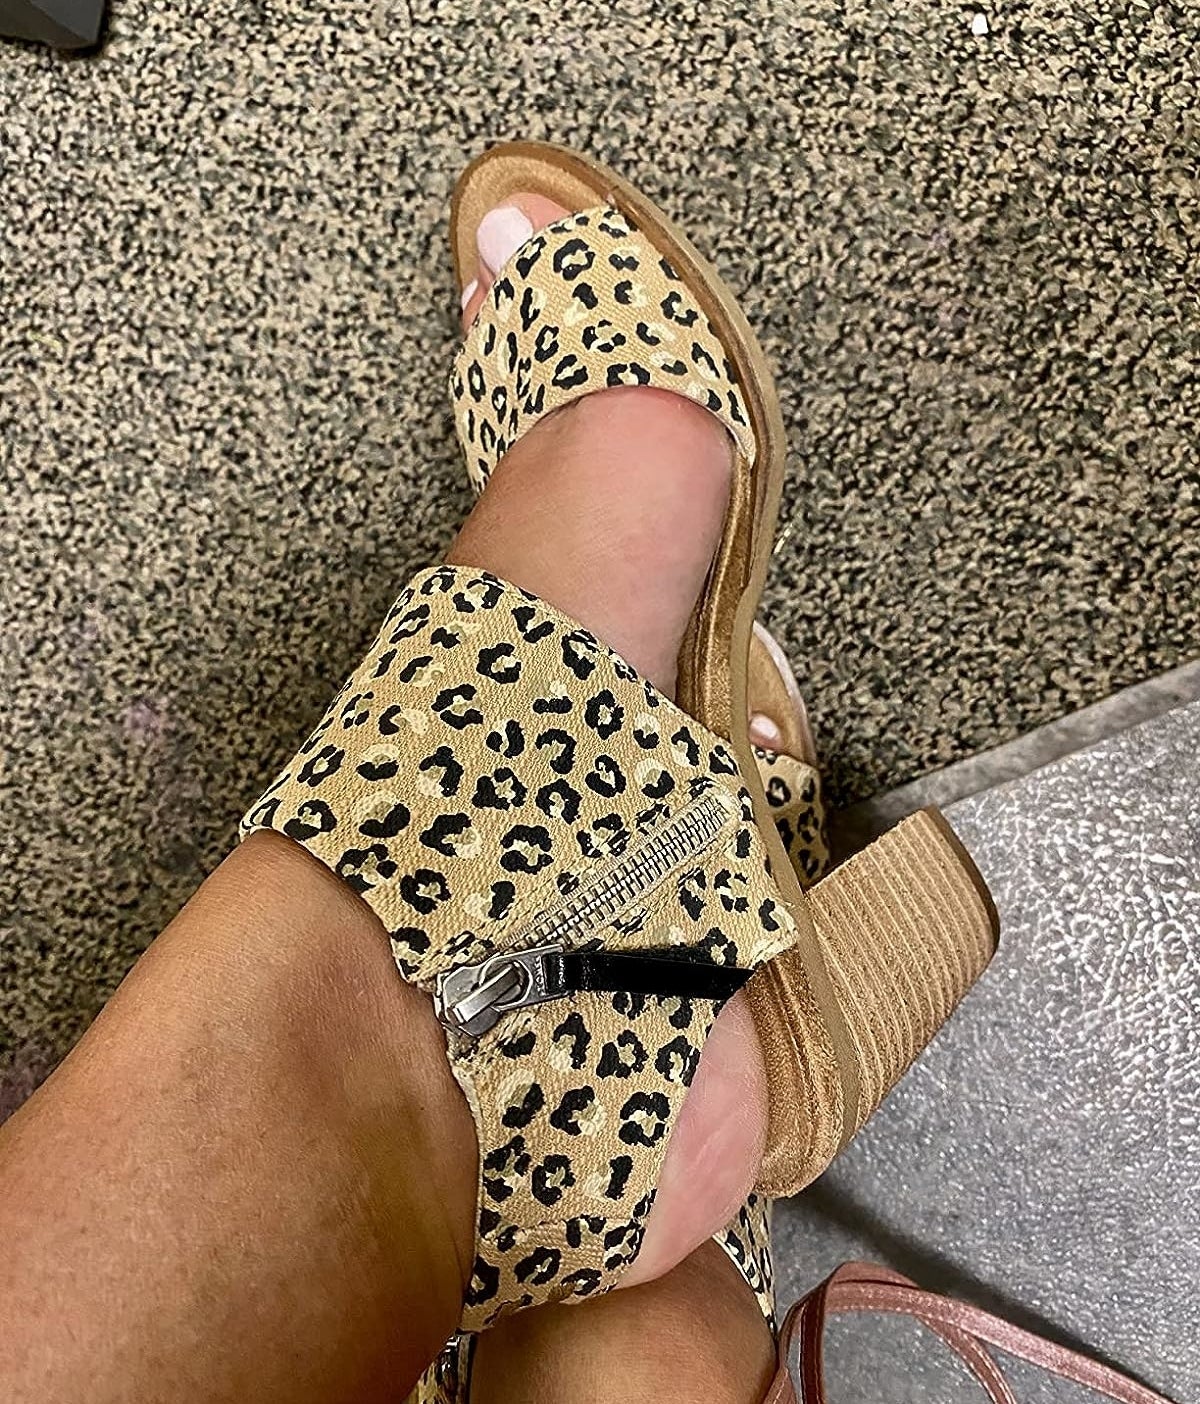 A reviewer wearing animal print sandals